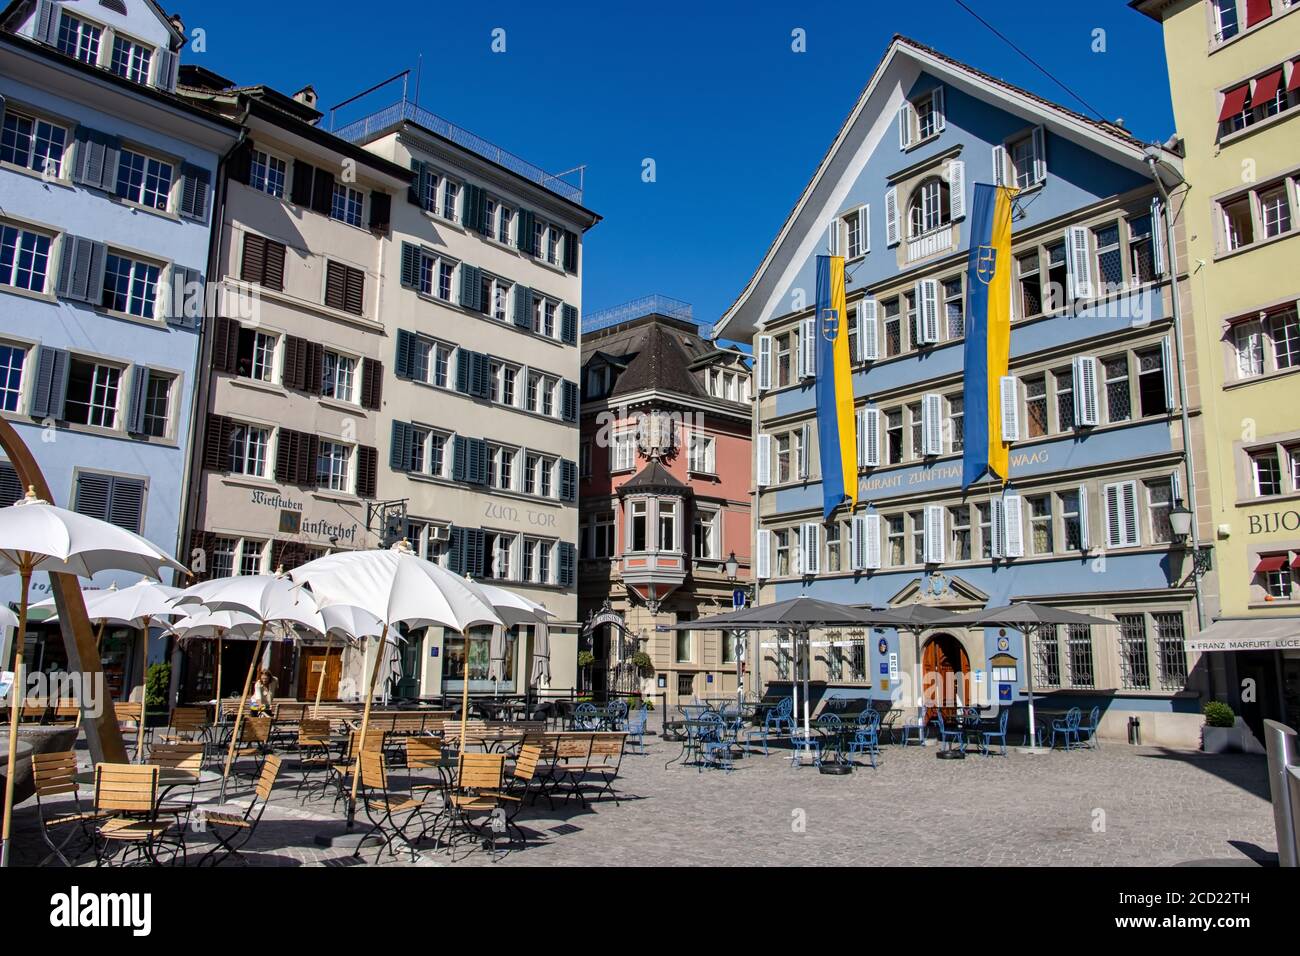 Zunfthaus High Resolution Stock Photography and Images - Alamy